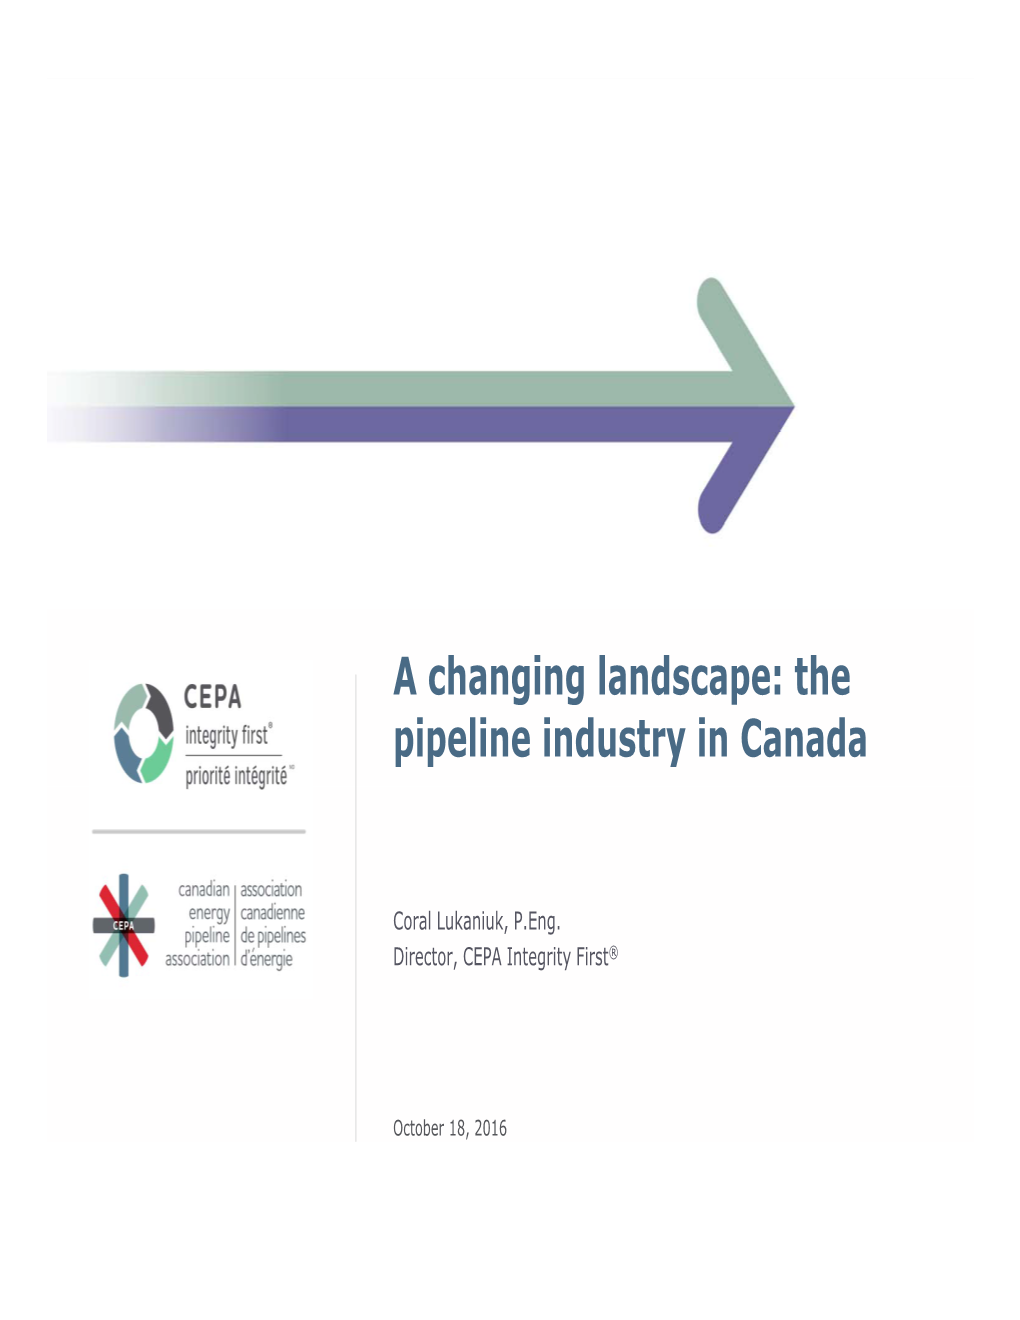 A Changing Landscape: the Pipeline Industry in Canada